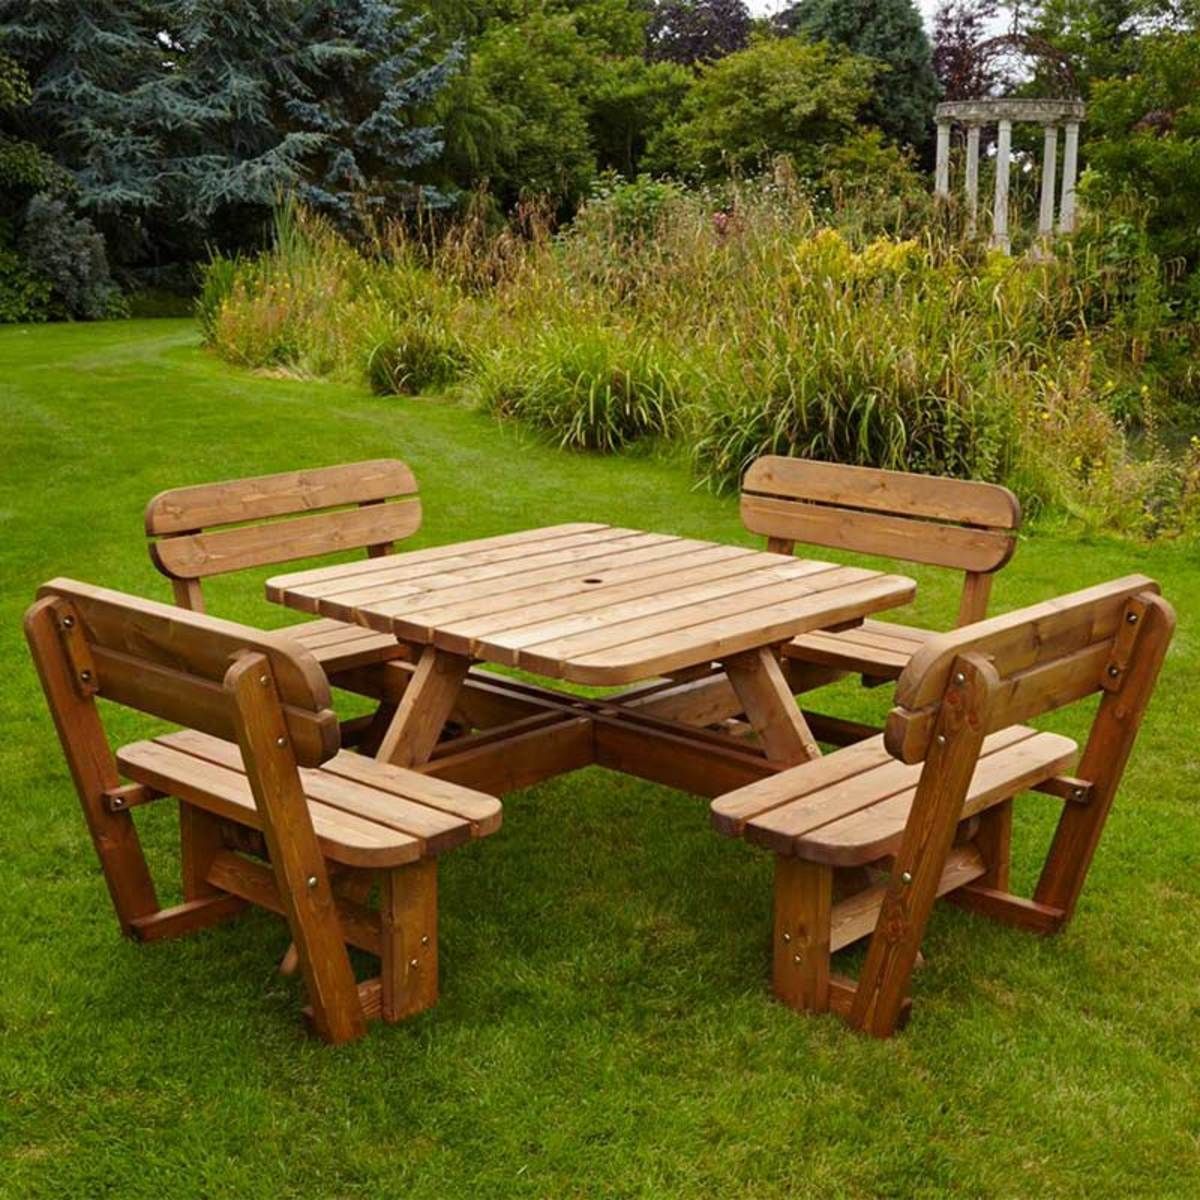 Anchor Fast 8 Seater Pine Wood Picnic Bench Costco UK Pallet patio